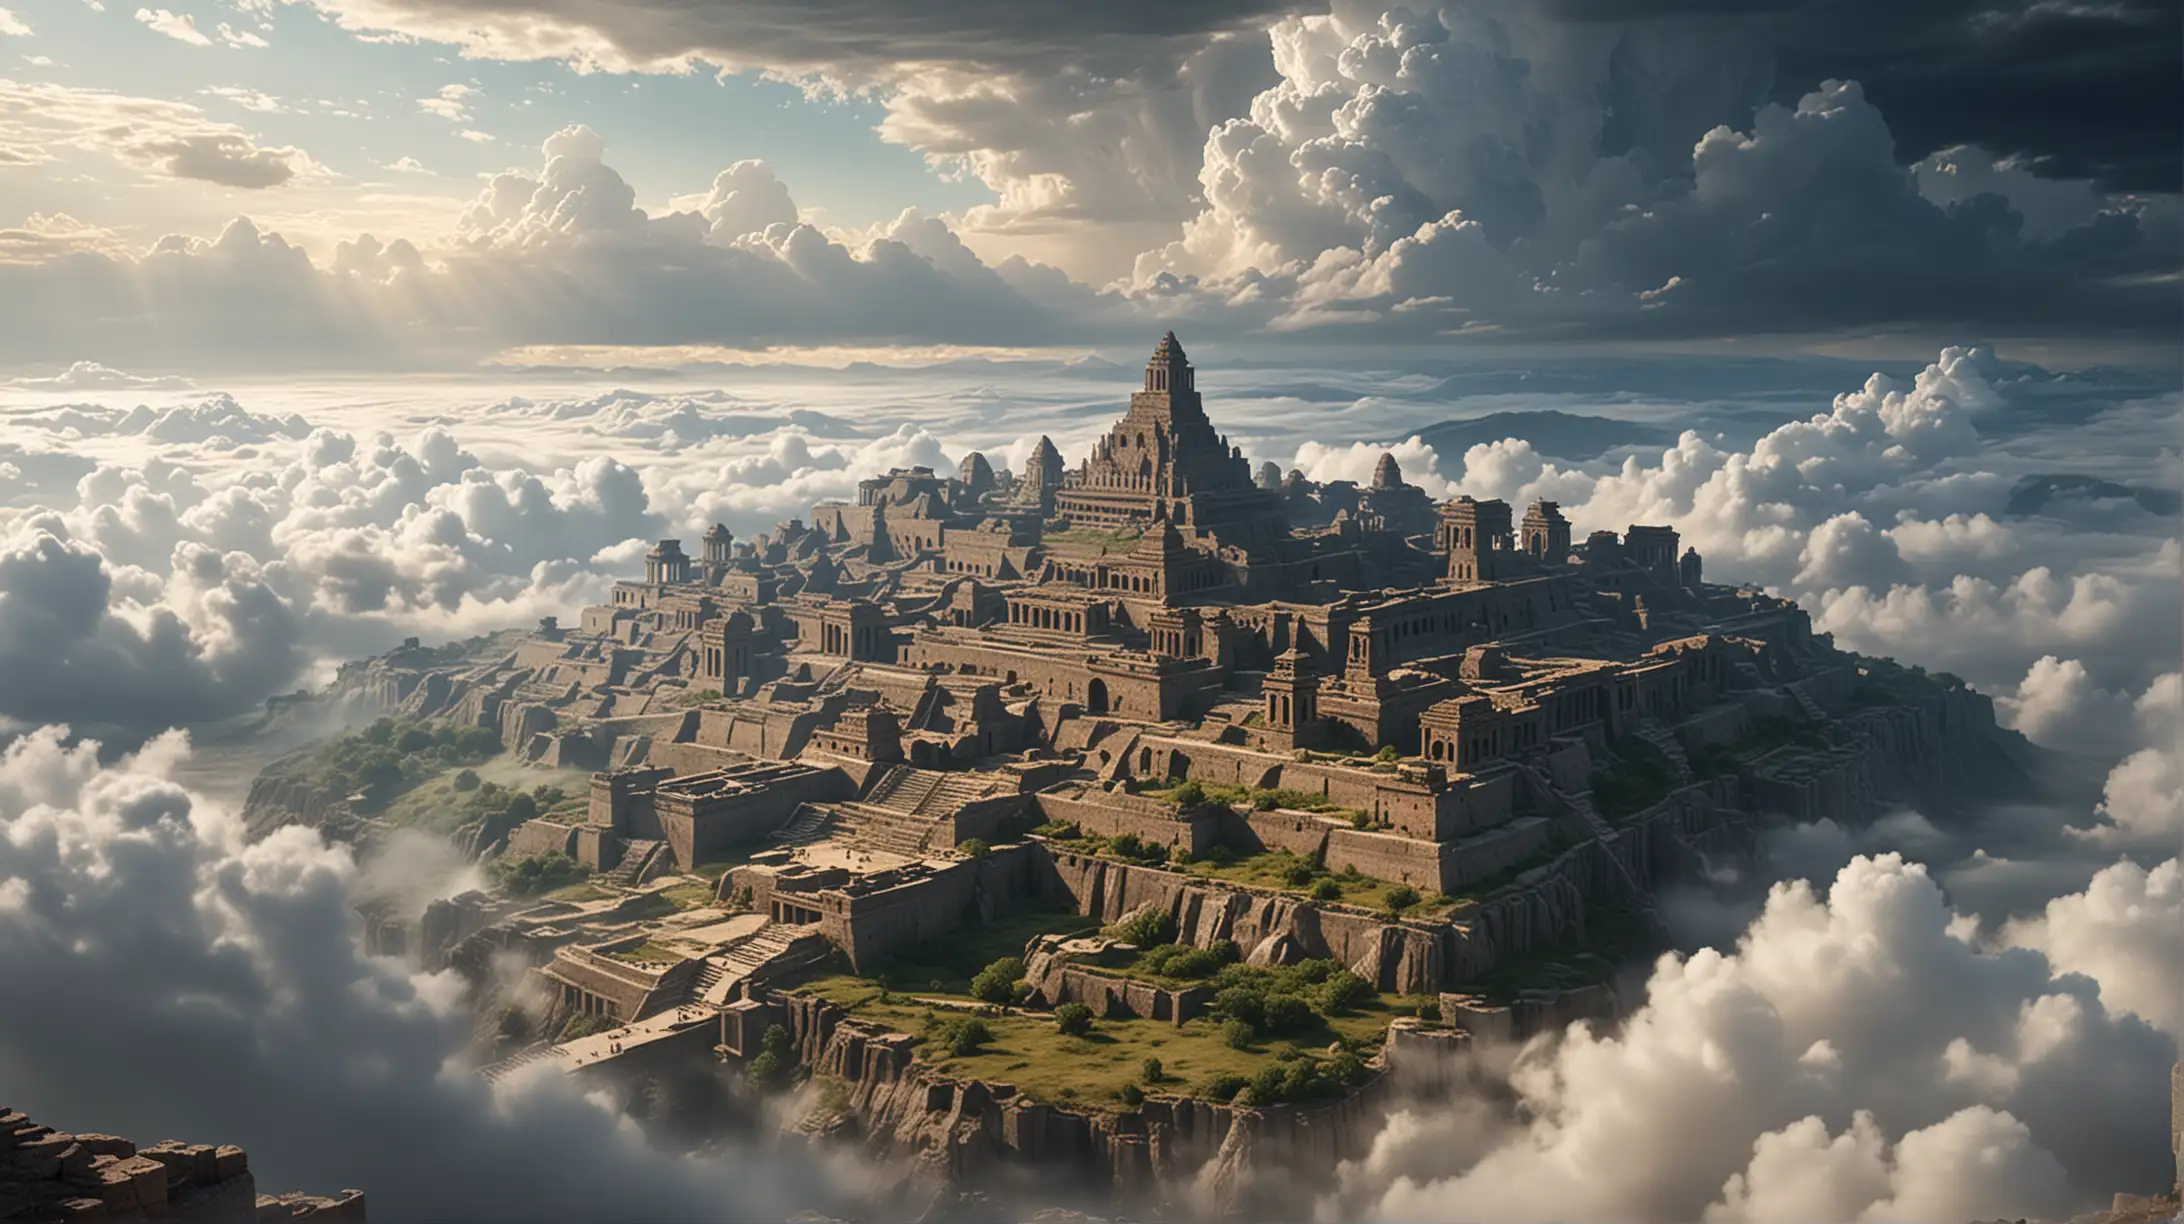 A large ancient city built on a special platform between clouds, distant view